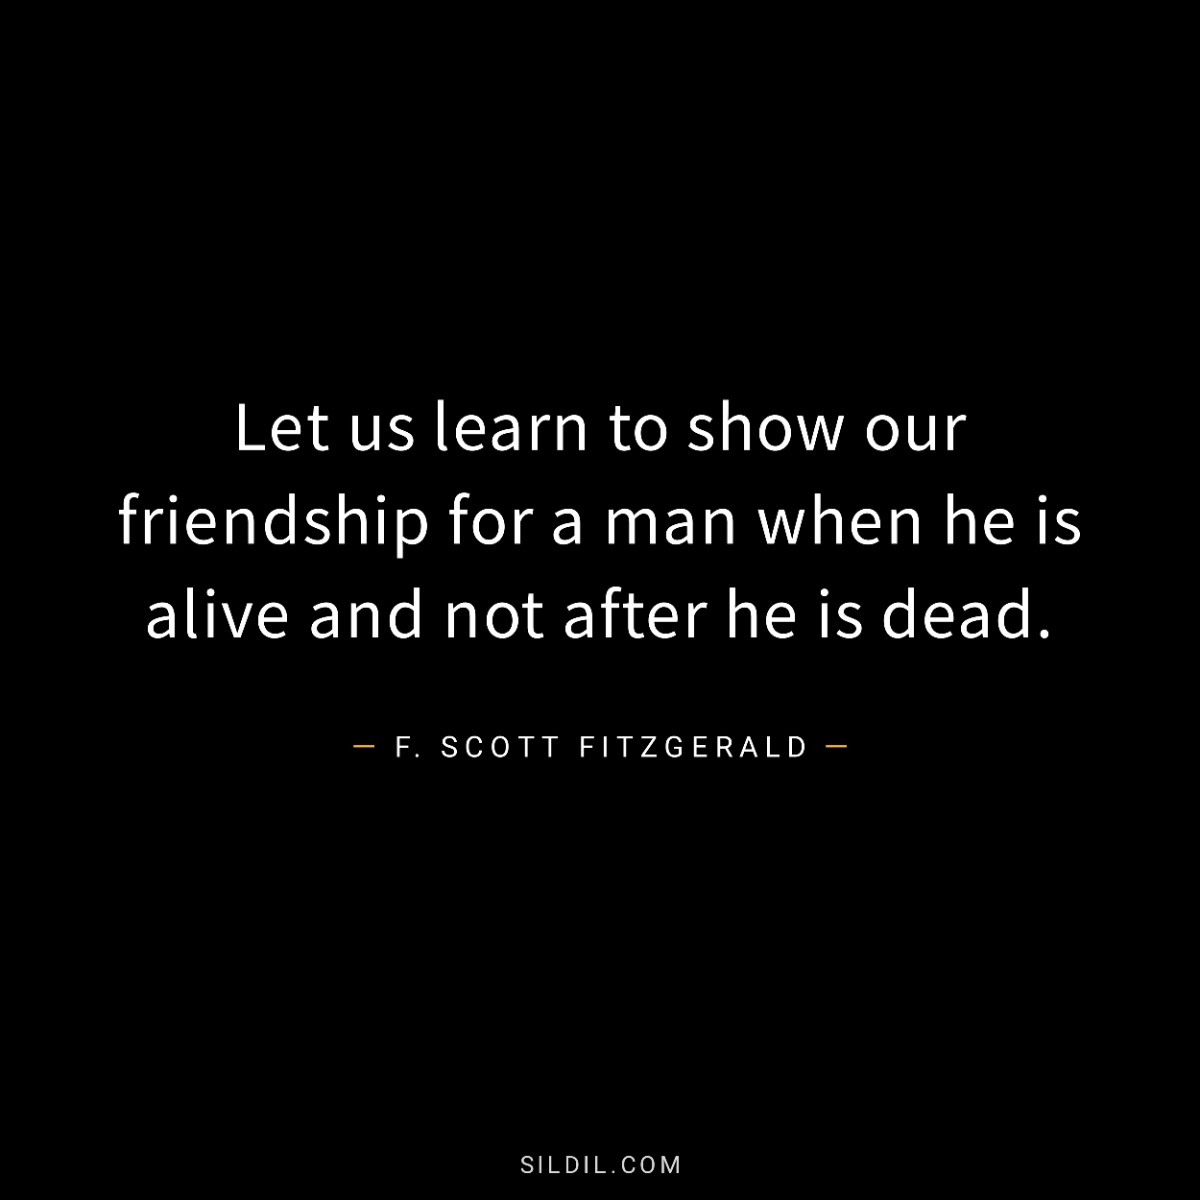 Let us learn to show our friendship for a man when he is alive and not after he is dead.